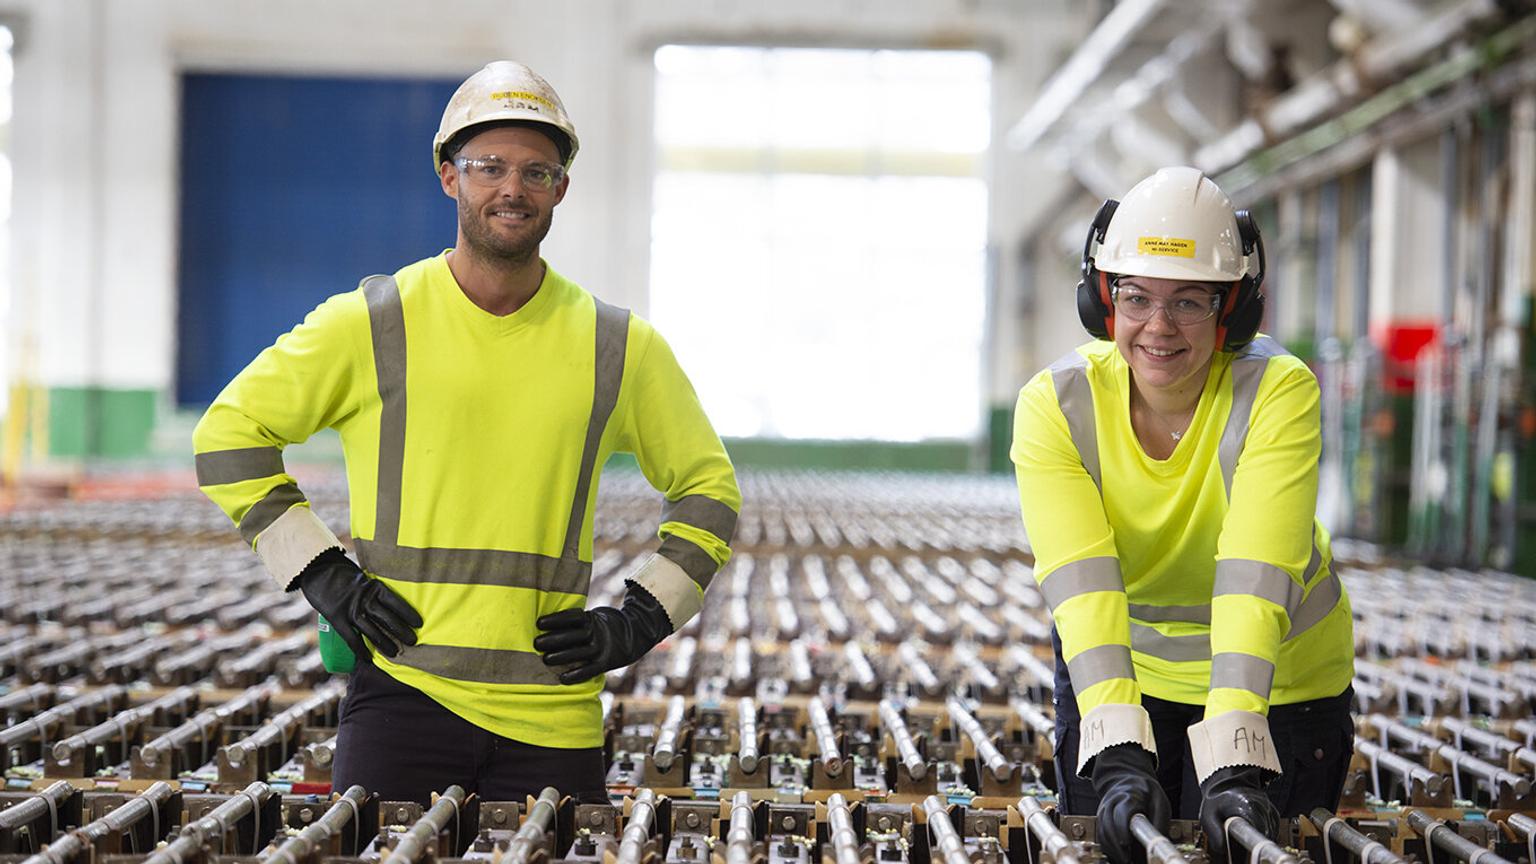 Two workers standing in an industrial setting